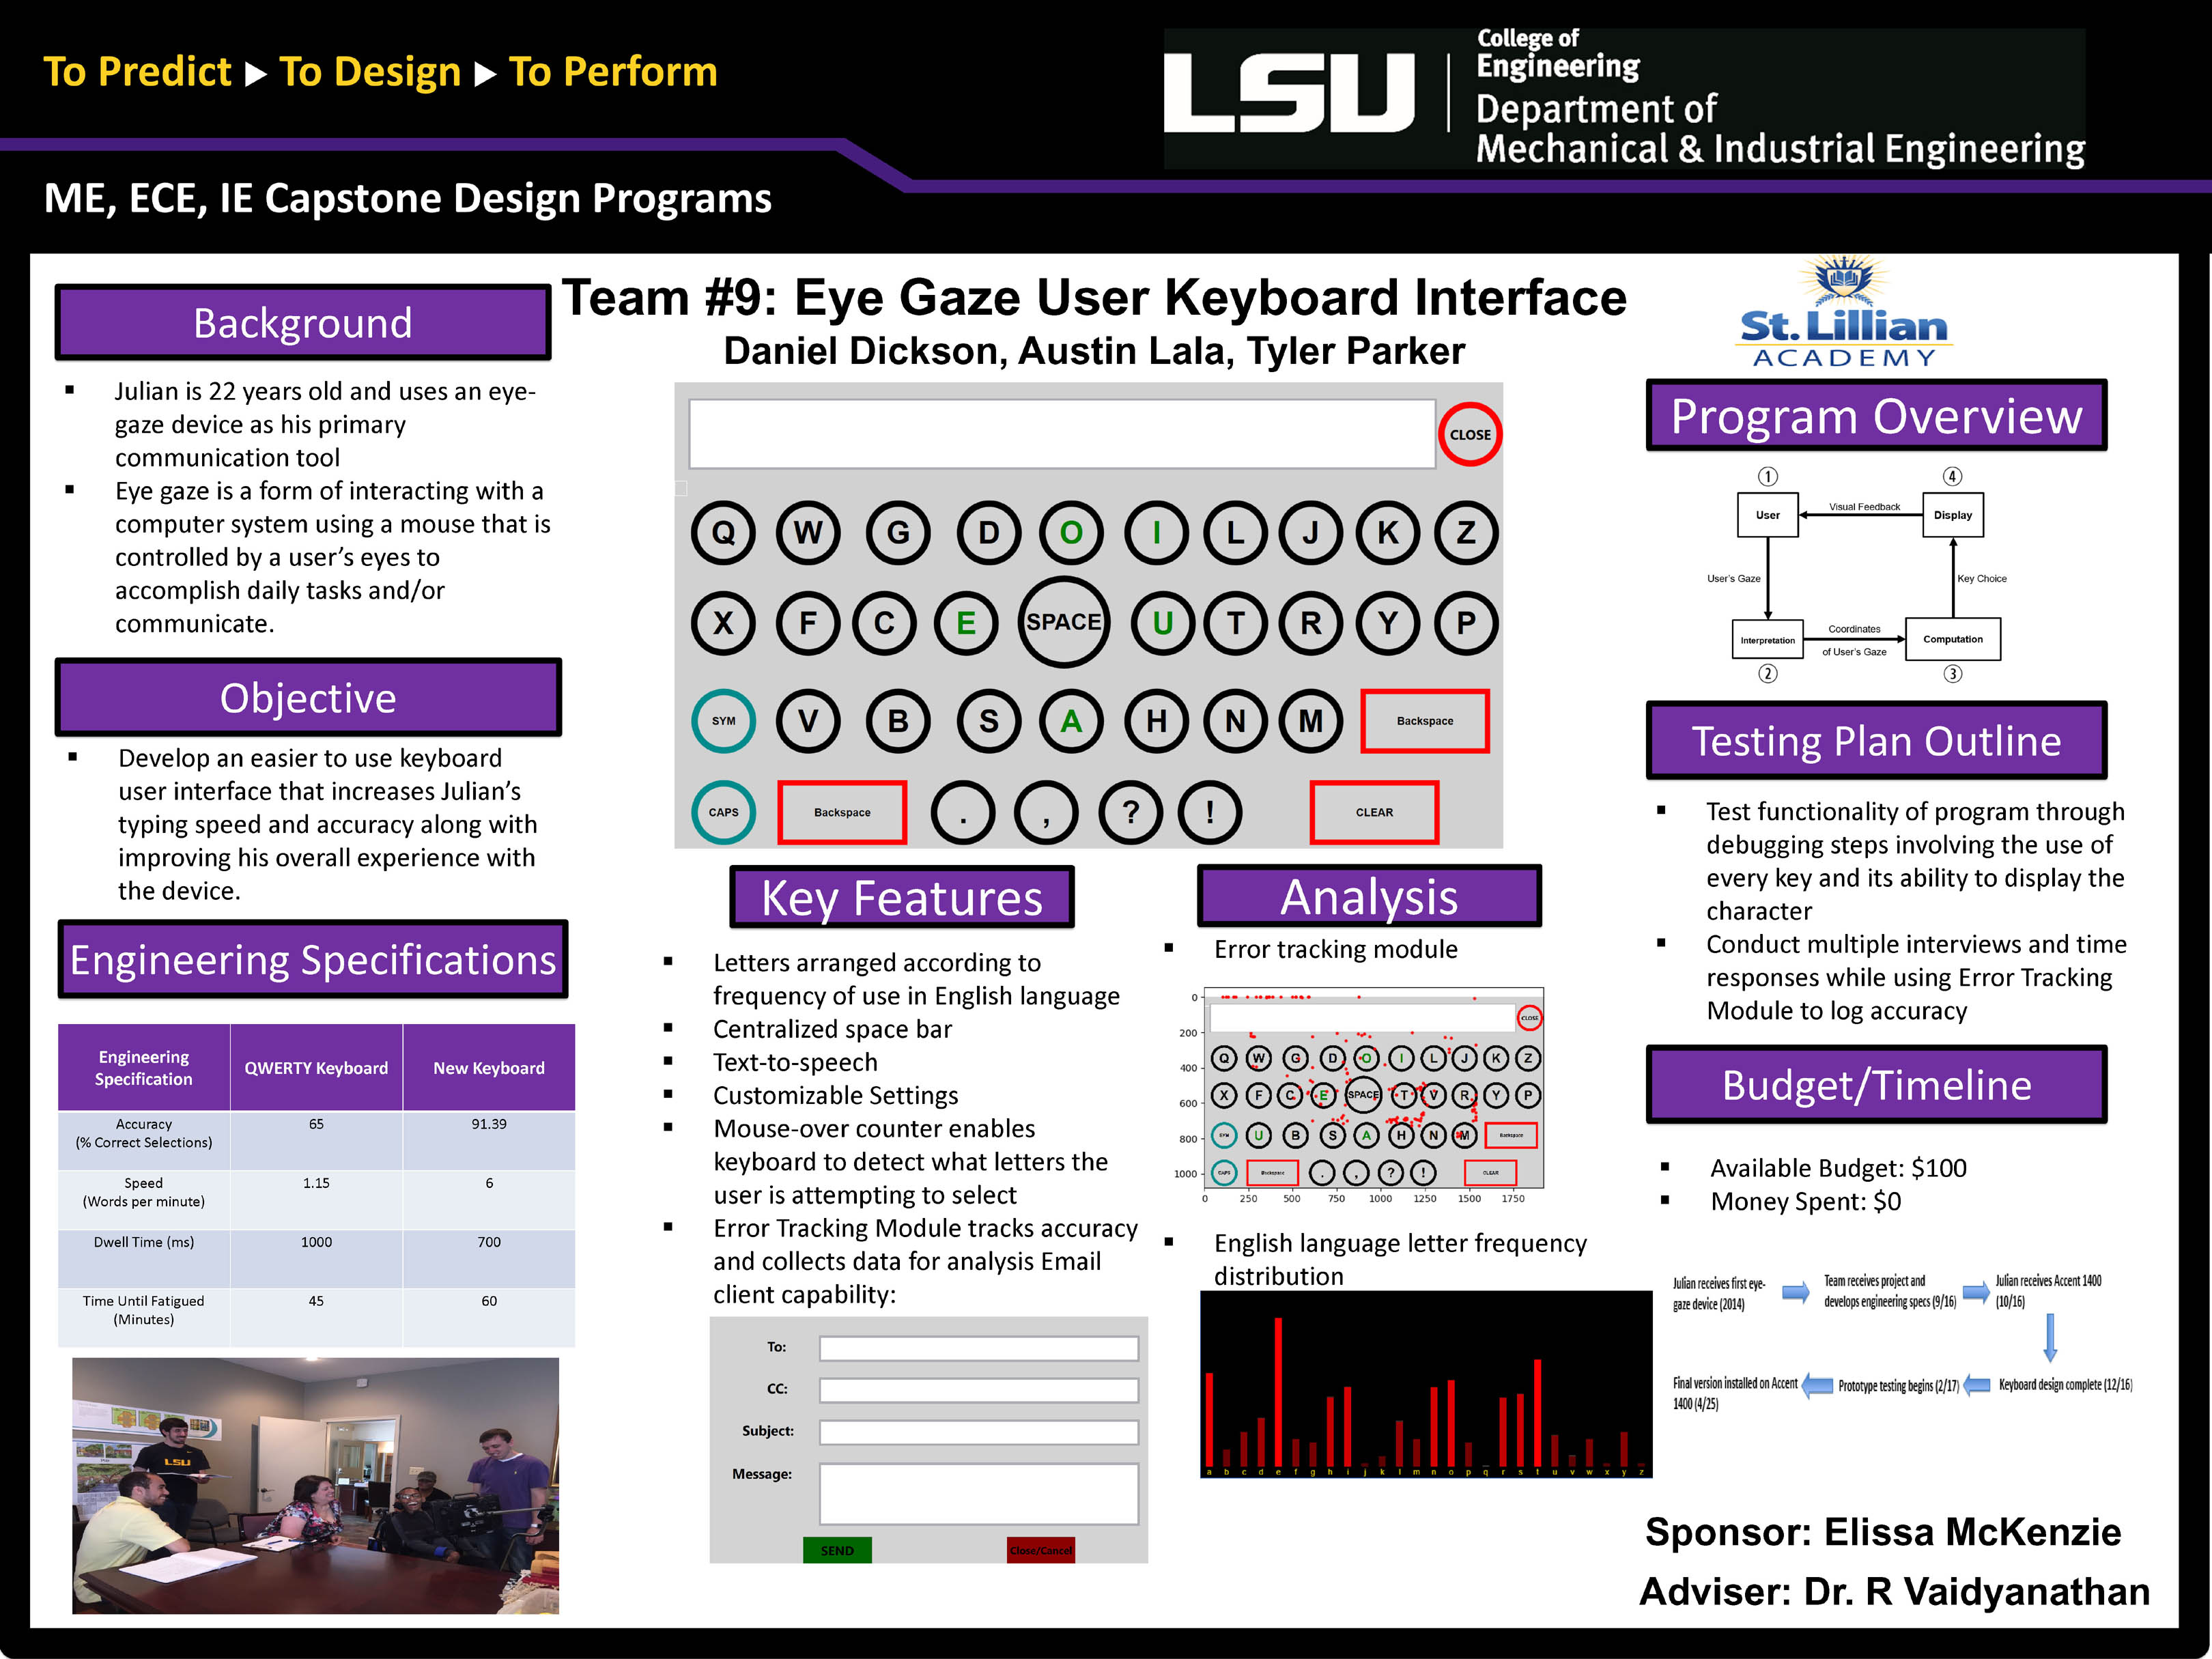 Project 9: Create Easier User Interface For Eye-Gaze Typing Technology